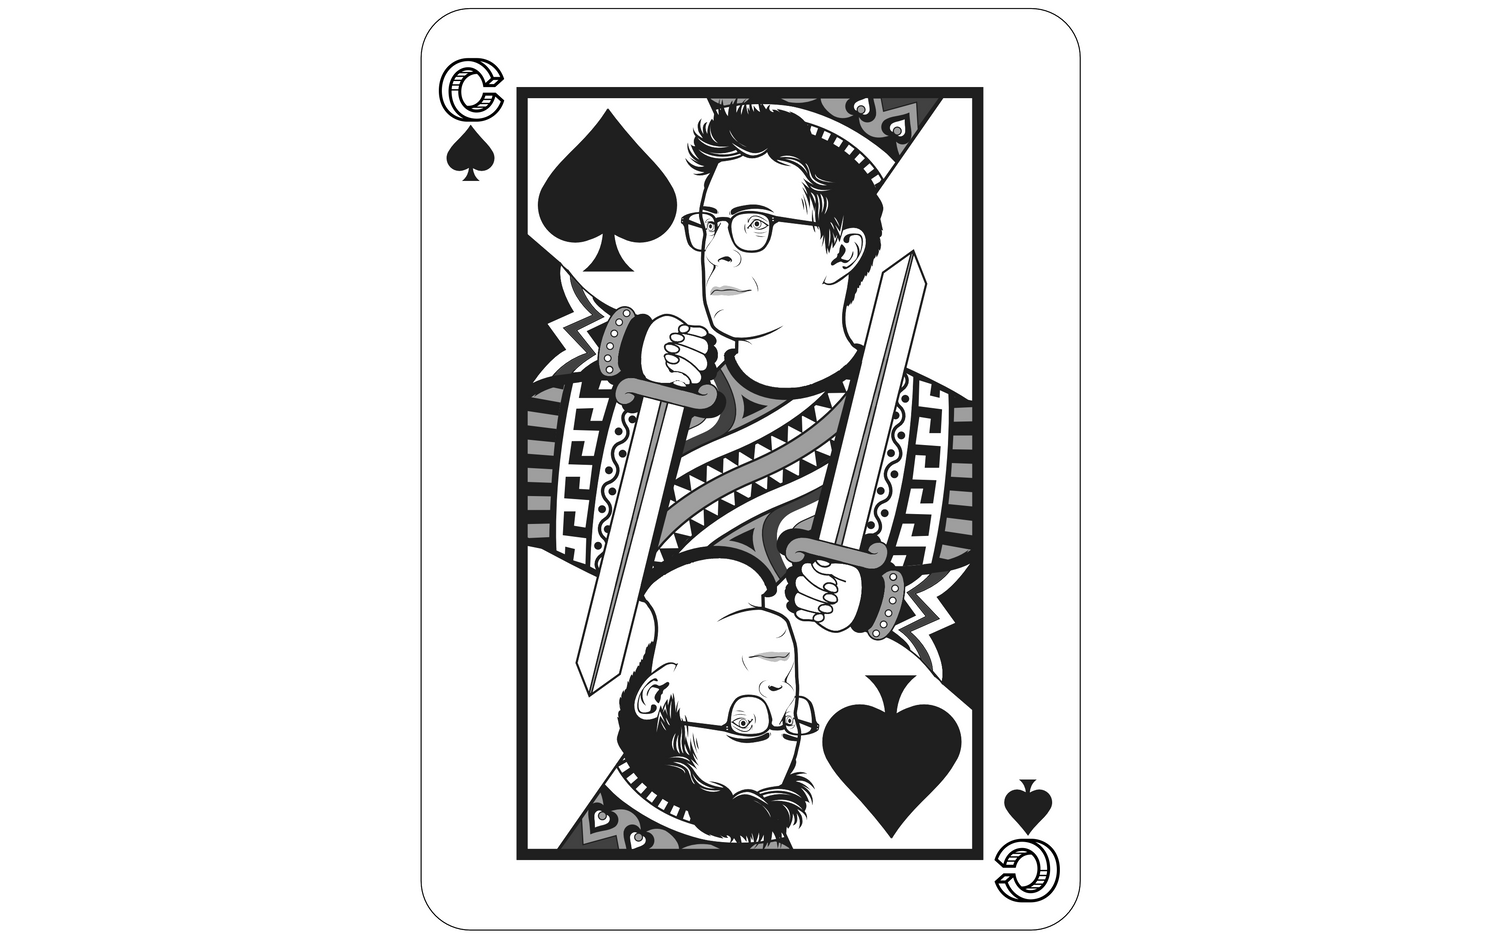 Playing card portrait of Cartesian Cards founder Rob Hallifax looking oddly like Gareth Bale